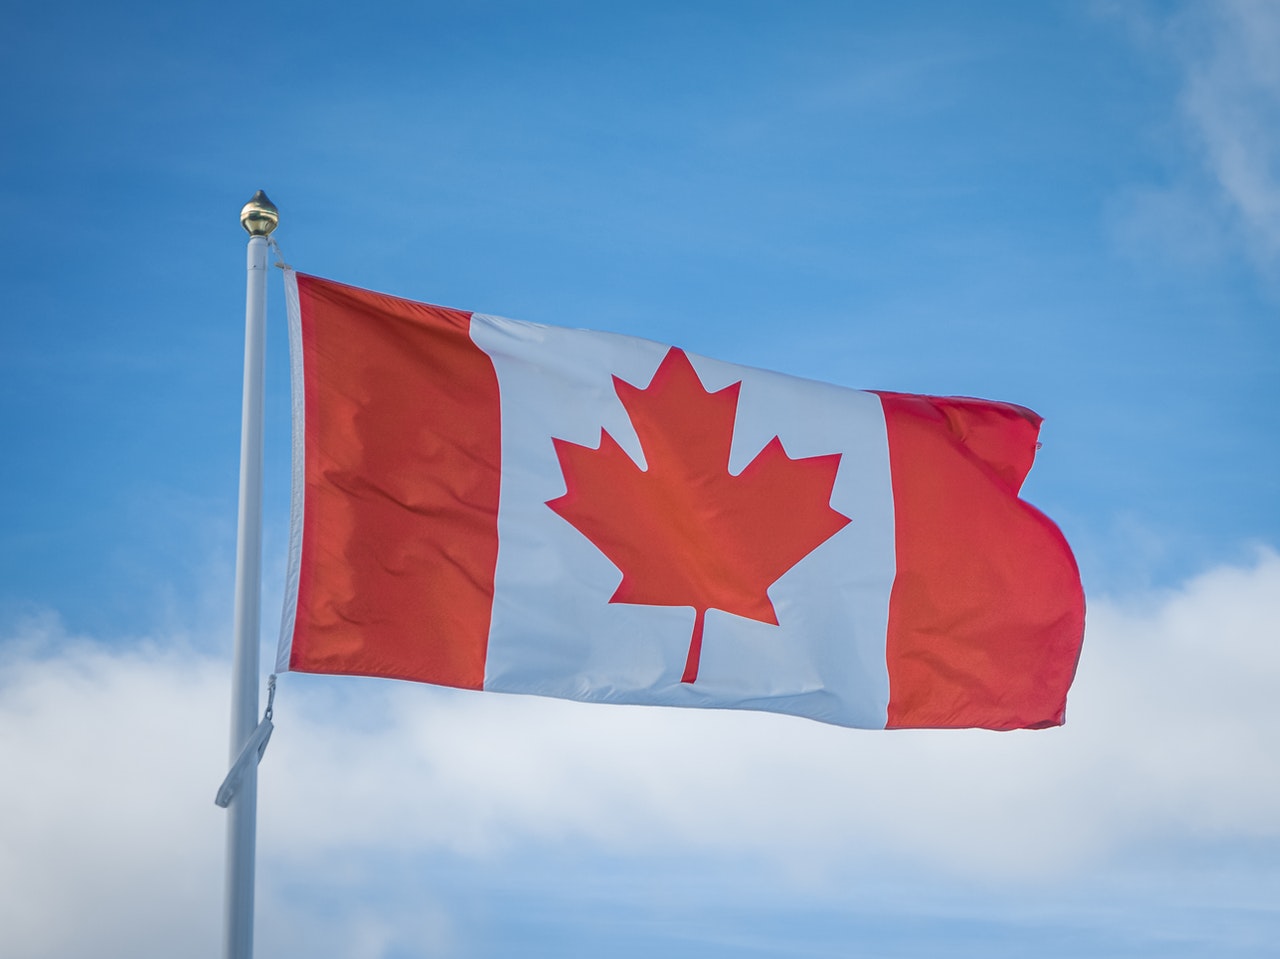 A New Bitcoin (BTC) Fund Will be launched by Galaxy Digital in Canada